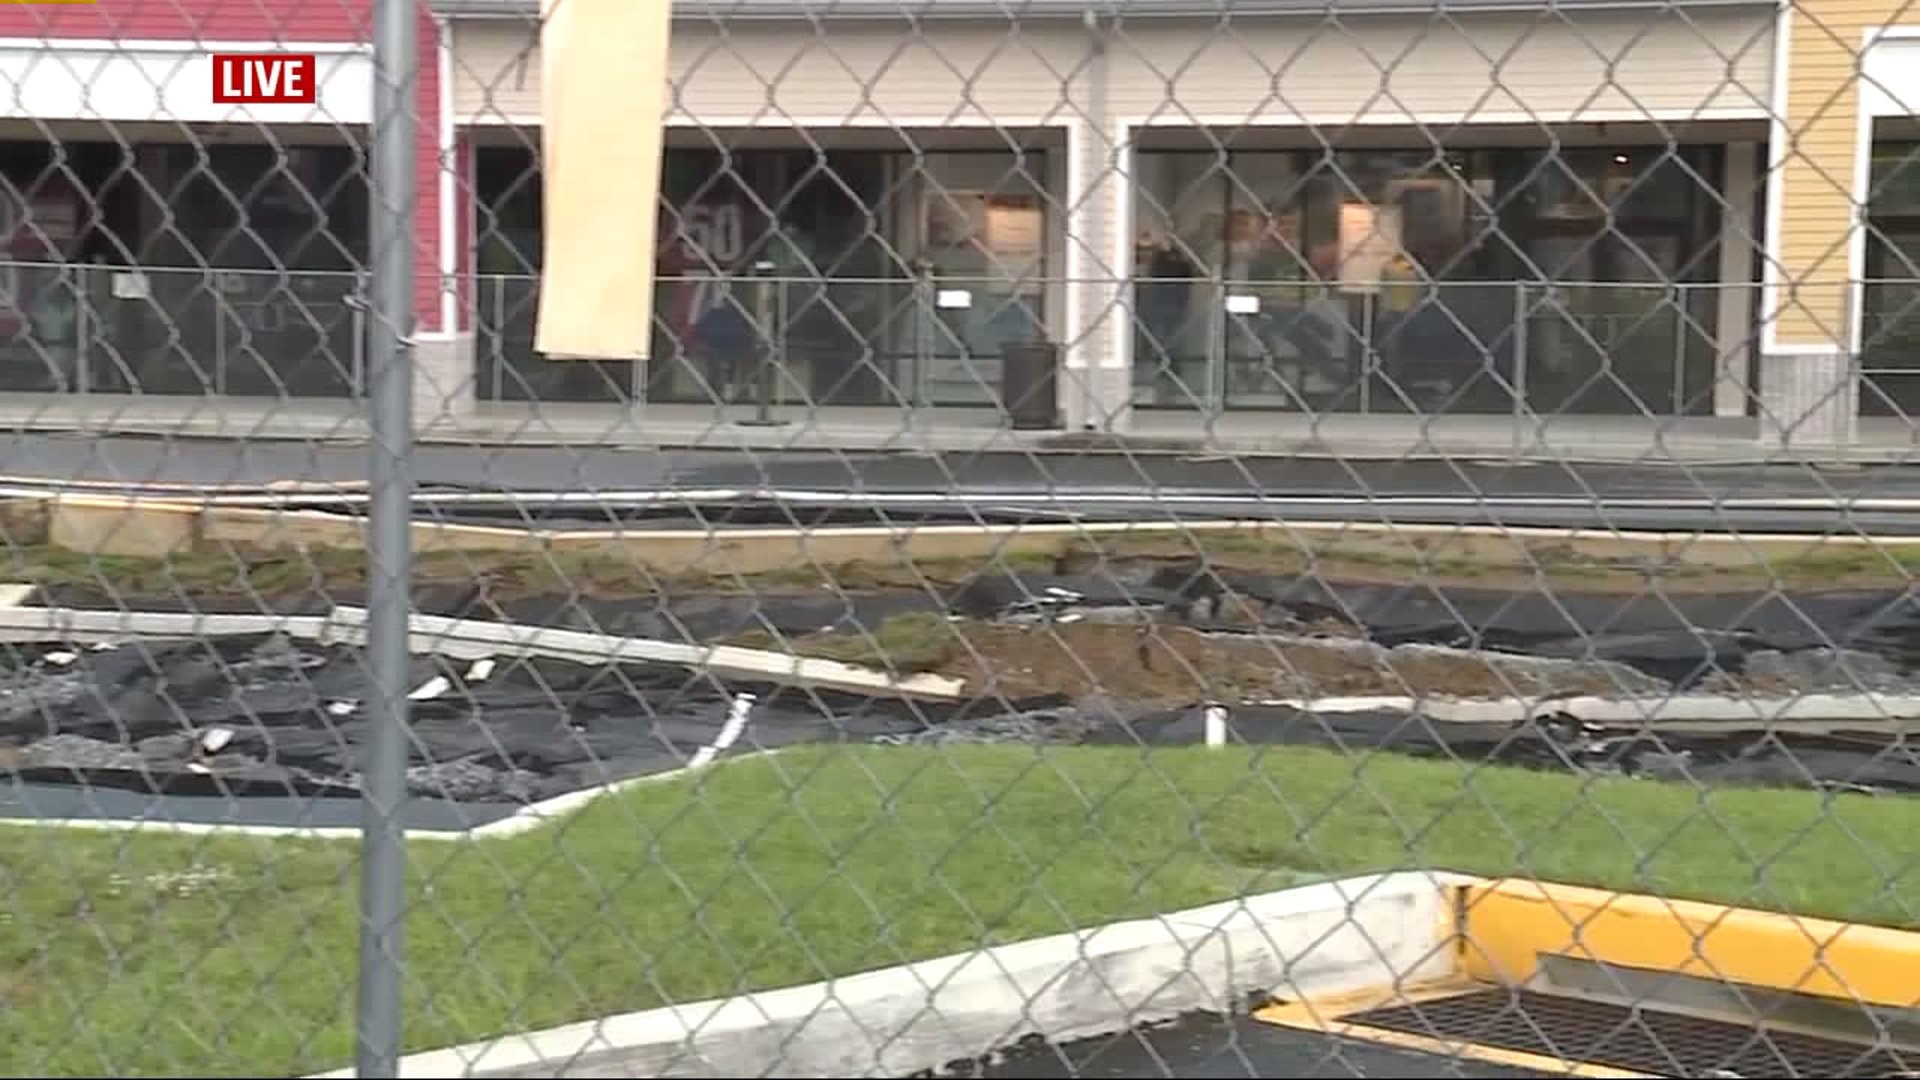 Sinkhole Repairs Continue in front of Tanger Outlets